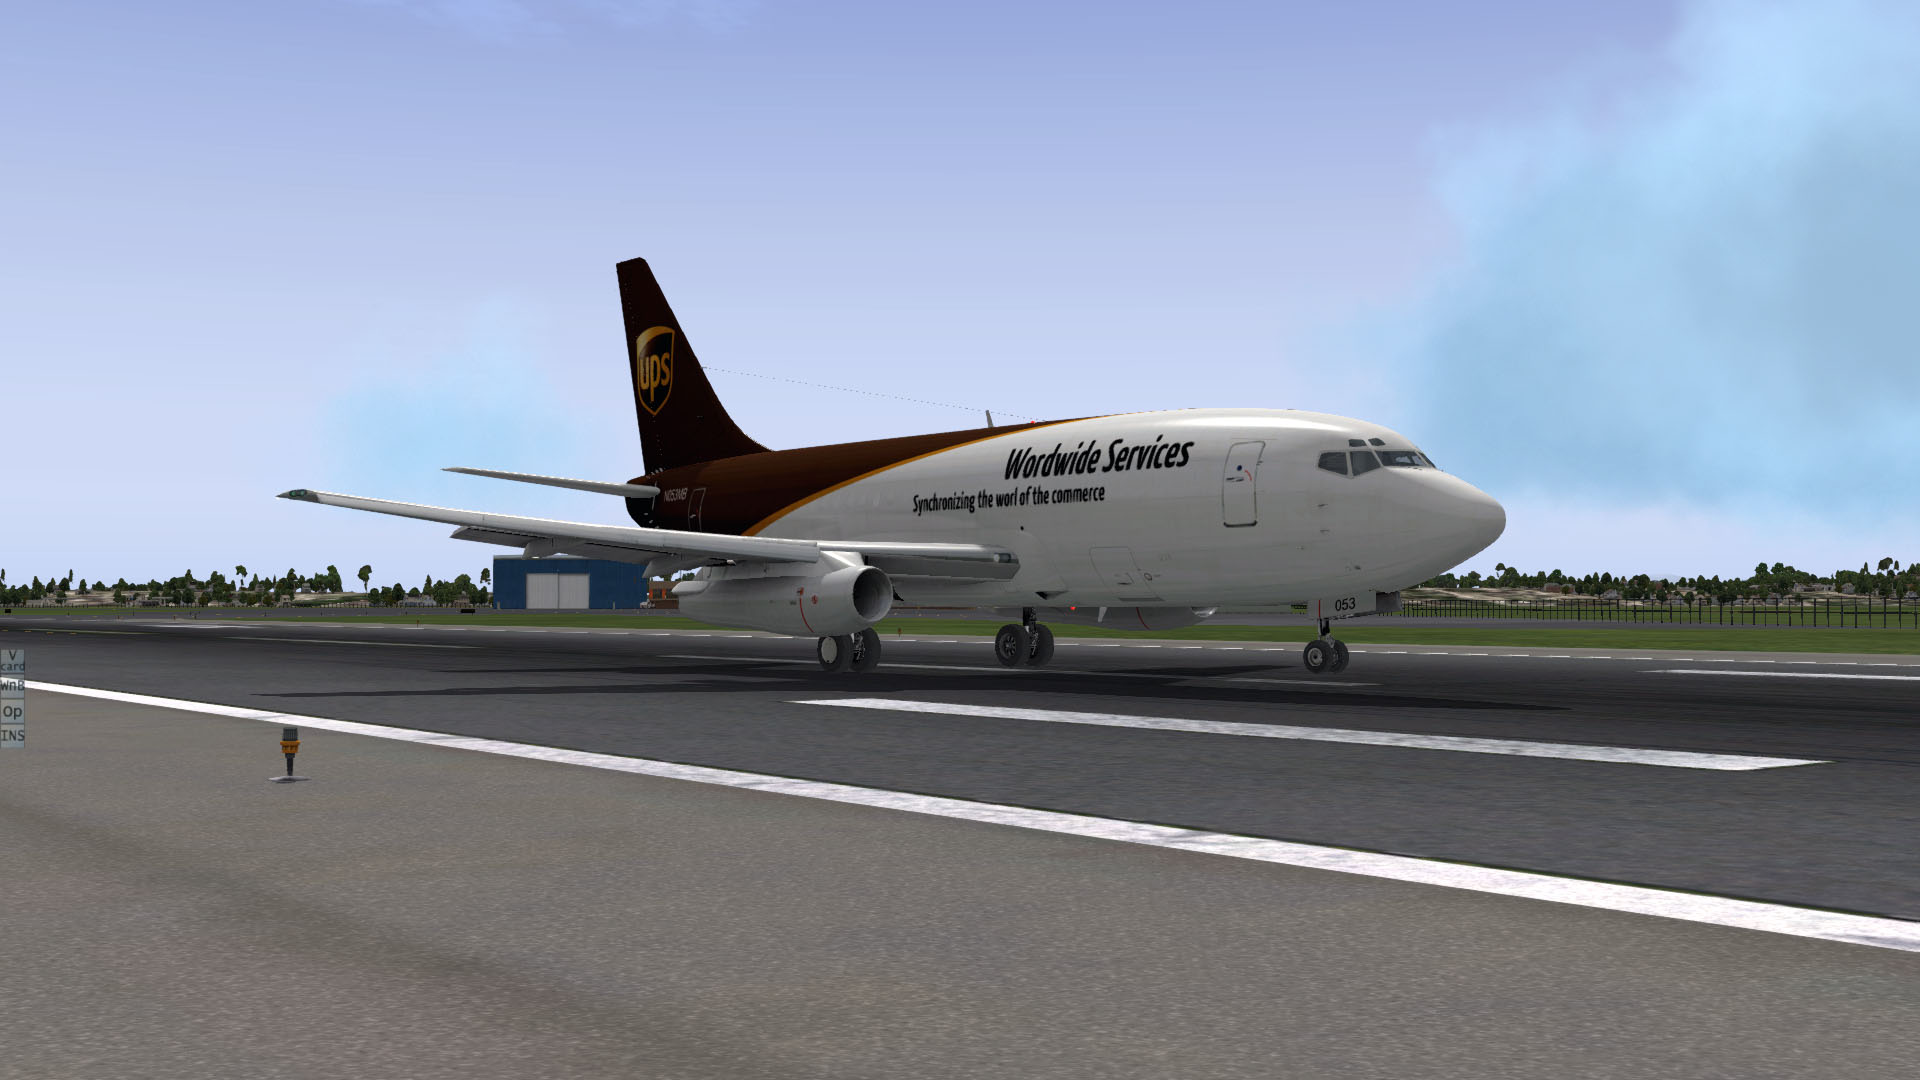 More information about "UPS - Boeing 737-200 TwinJet"